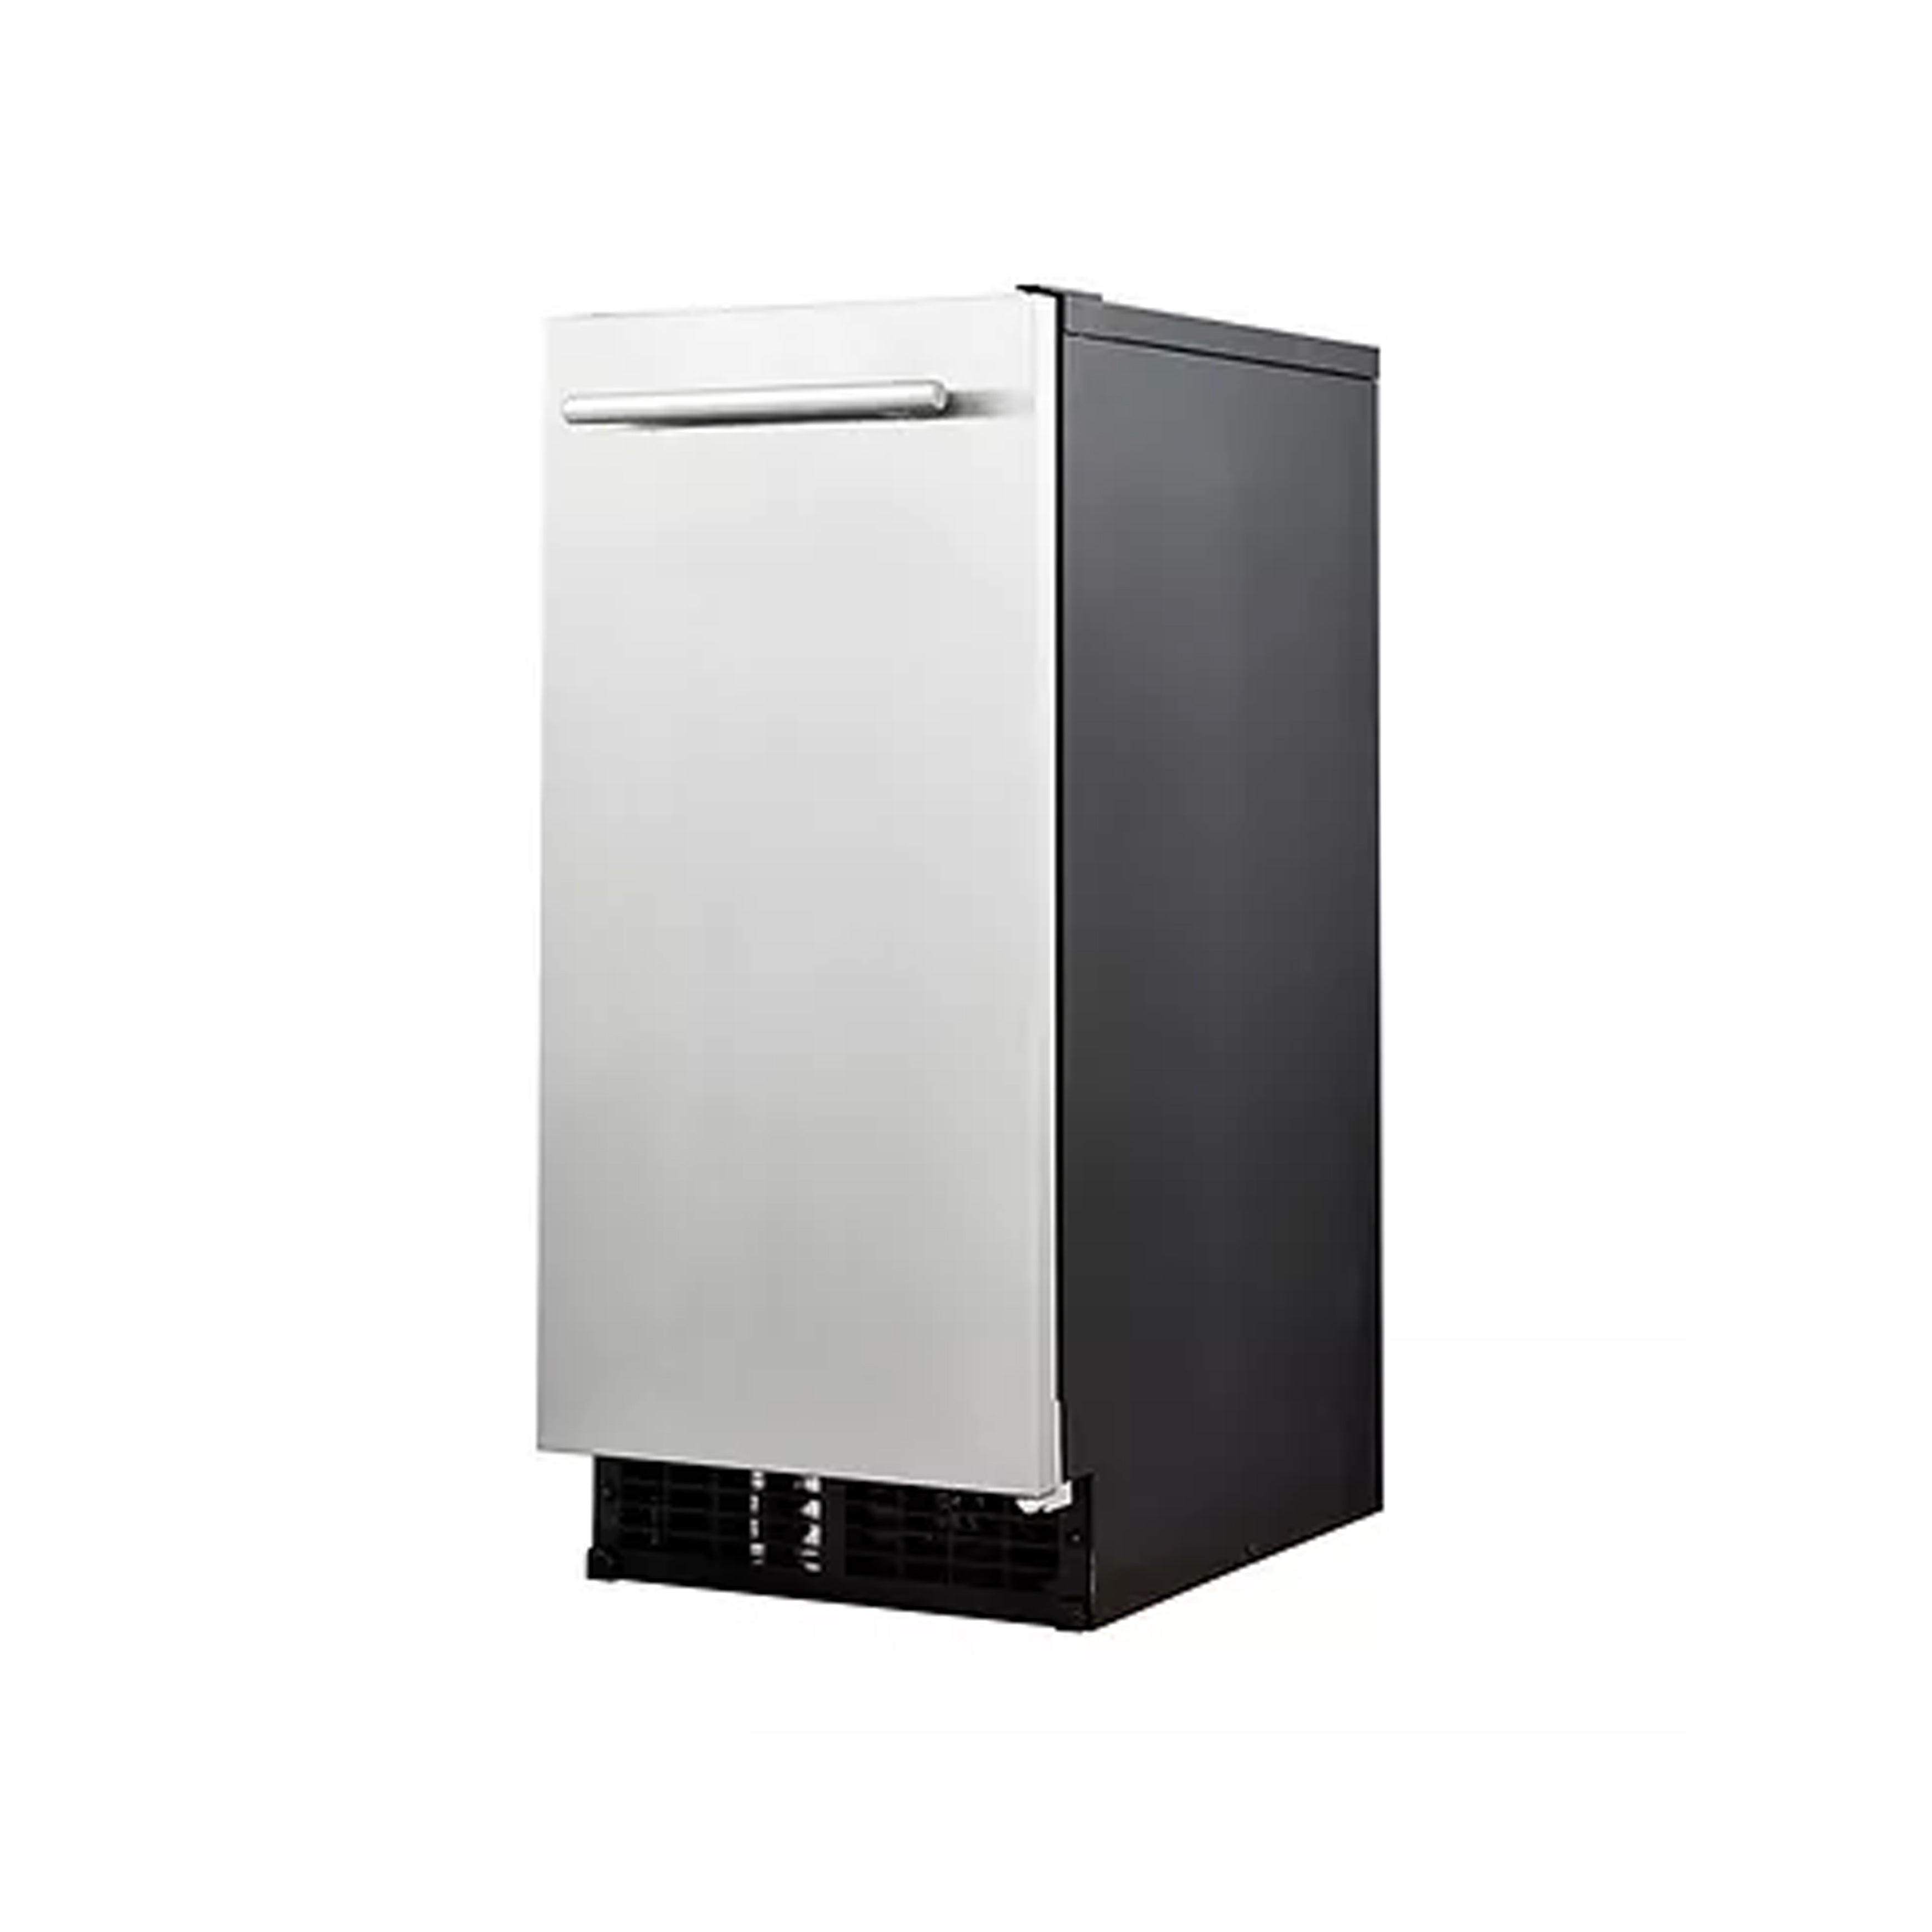 Icetro - IU-0070-OU, Commercial 60lbs Undercounter Air Cooled Ice Machine Gourmet Bell Ice Maker